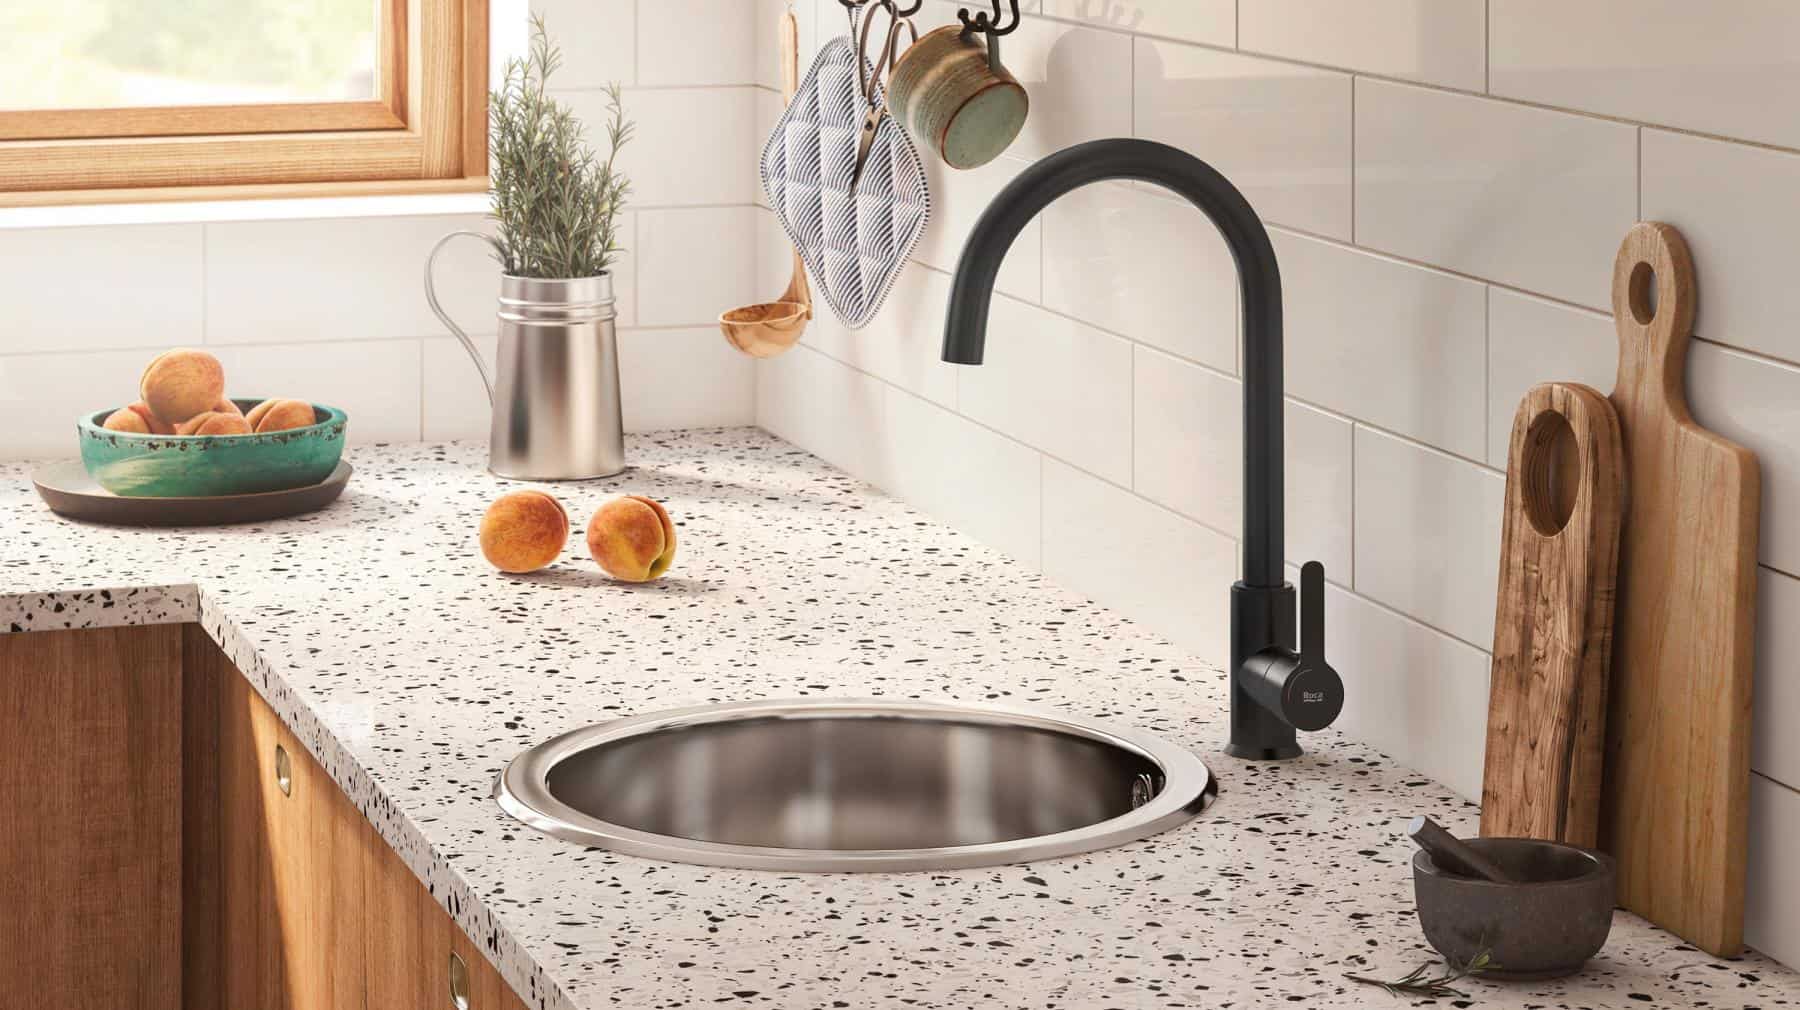 16 Types of Kitchen Faucets Explained [With Pros + Cons]